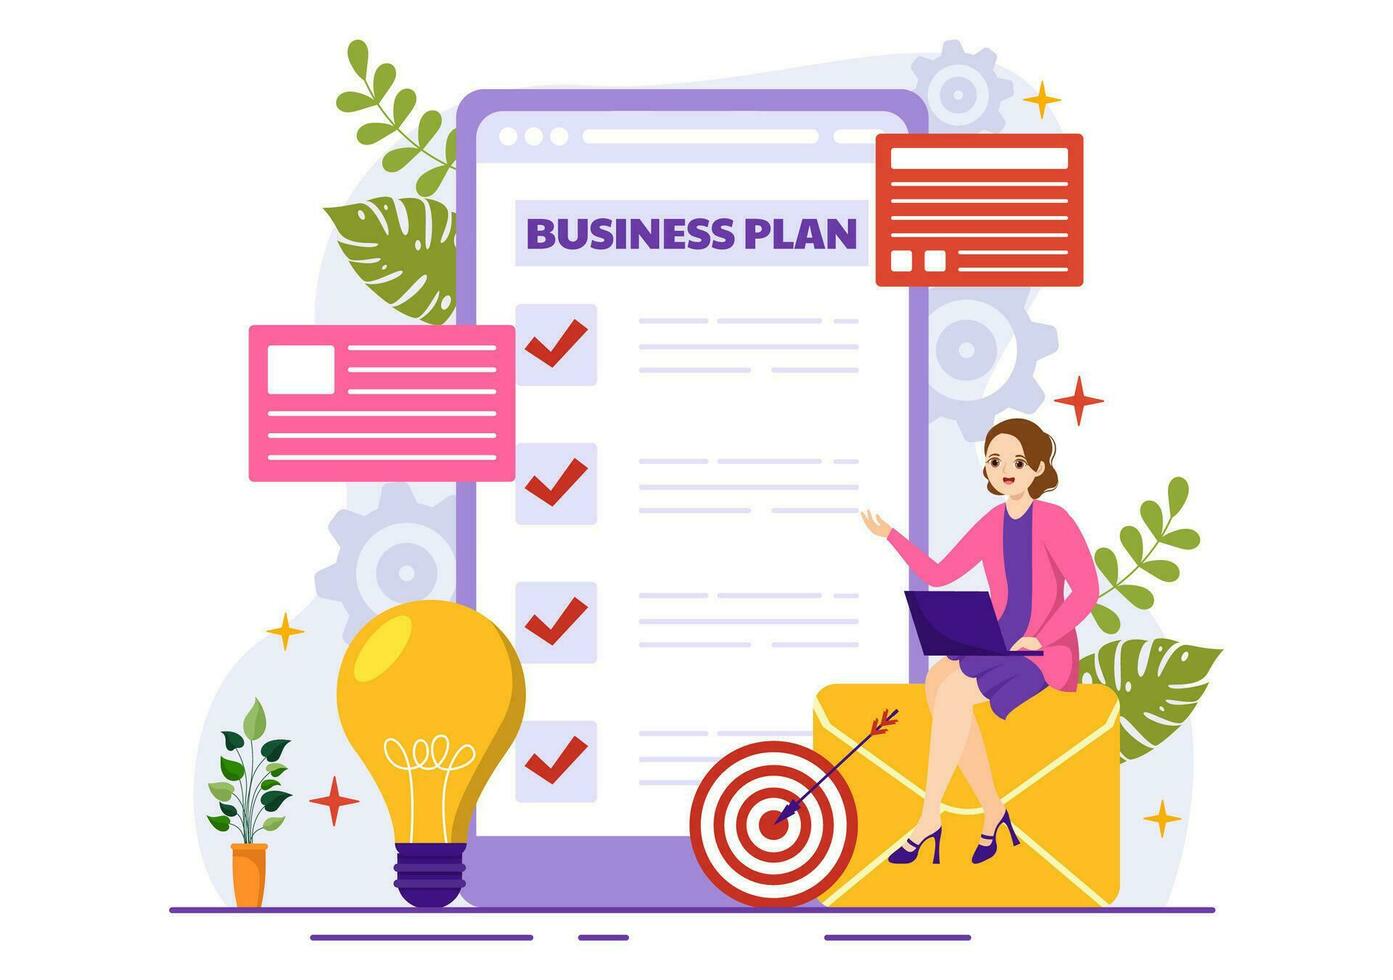 Business Plan Vector Illustration with Target, Planning, Workflow, Time Management, Statistical and Data Analysis in Flat Cartoon Background